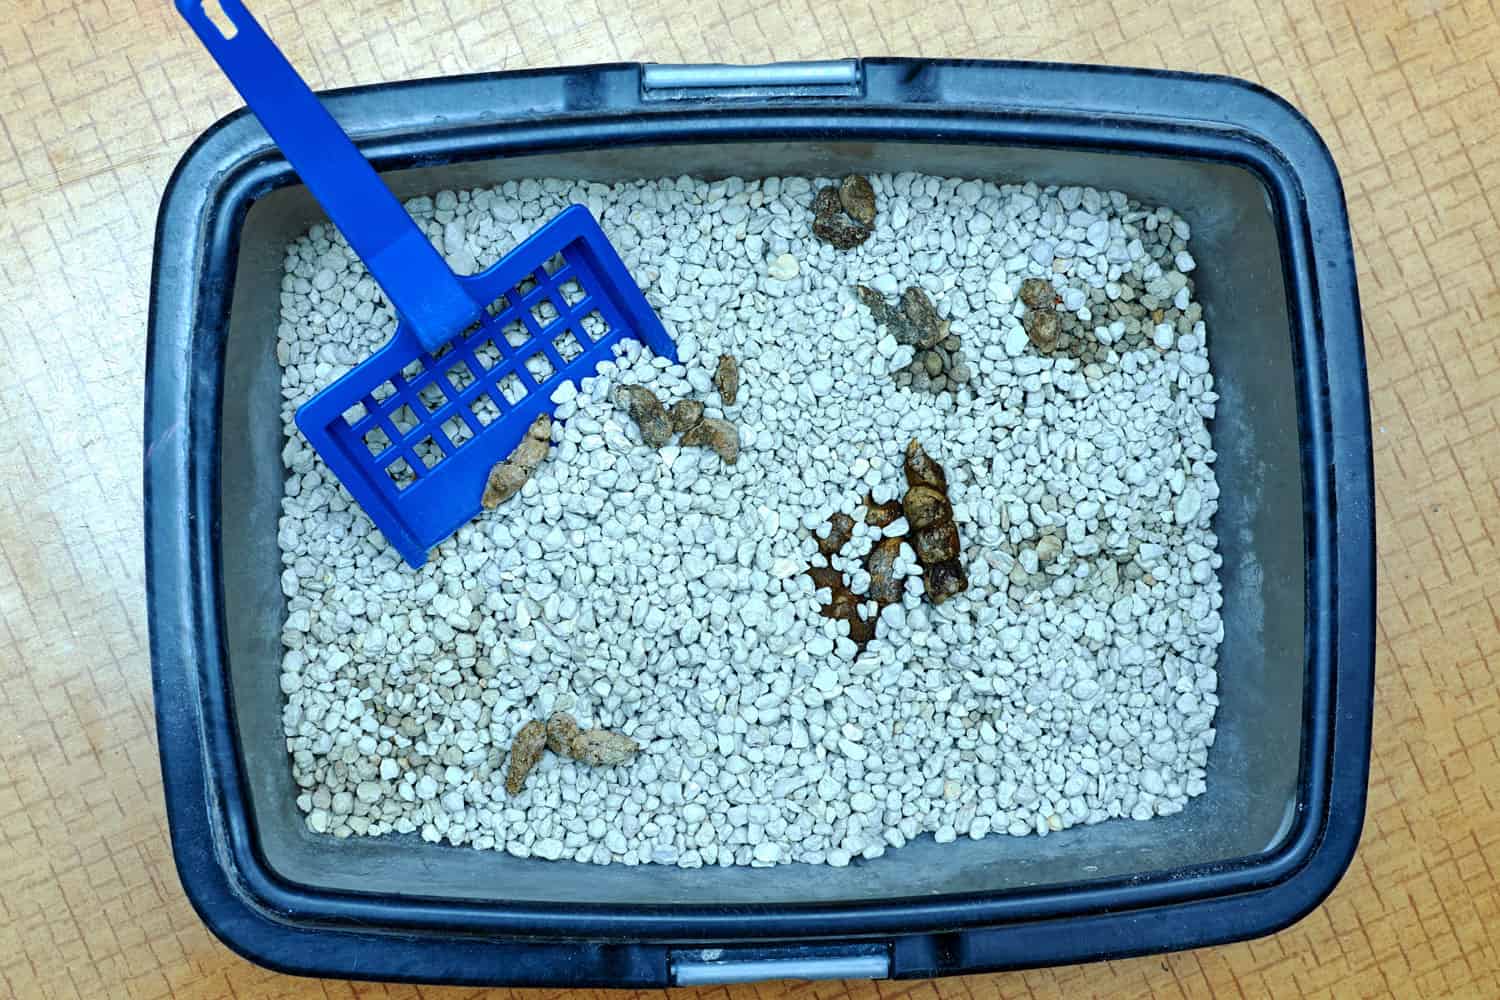 Cat poo in cat litter - What Is The White Stuff In Your Cat's Litter Box? (Inc. From Urine, In Feces, & Environmental Contaminants)